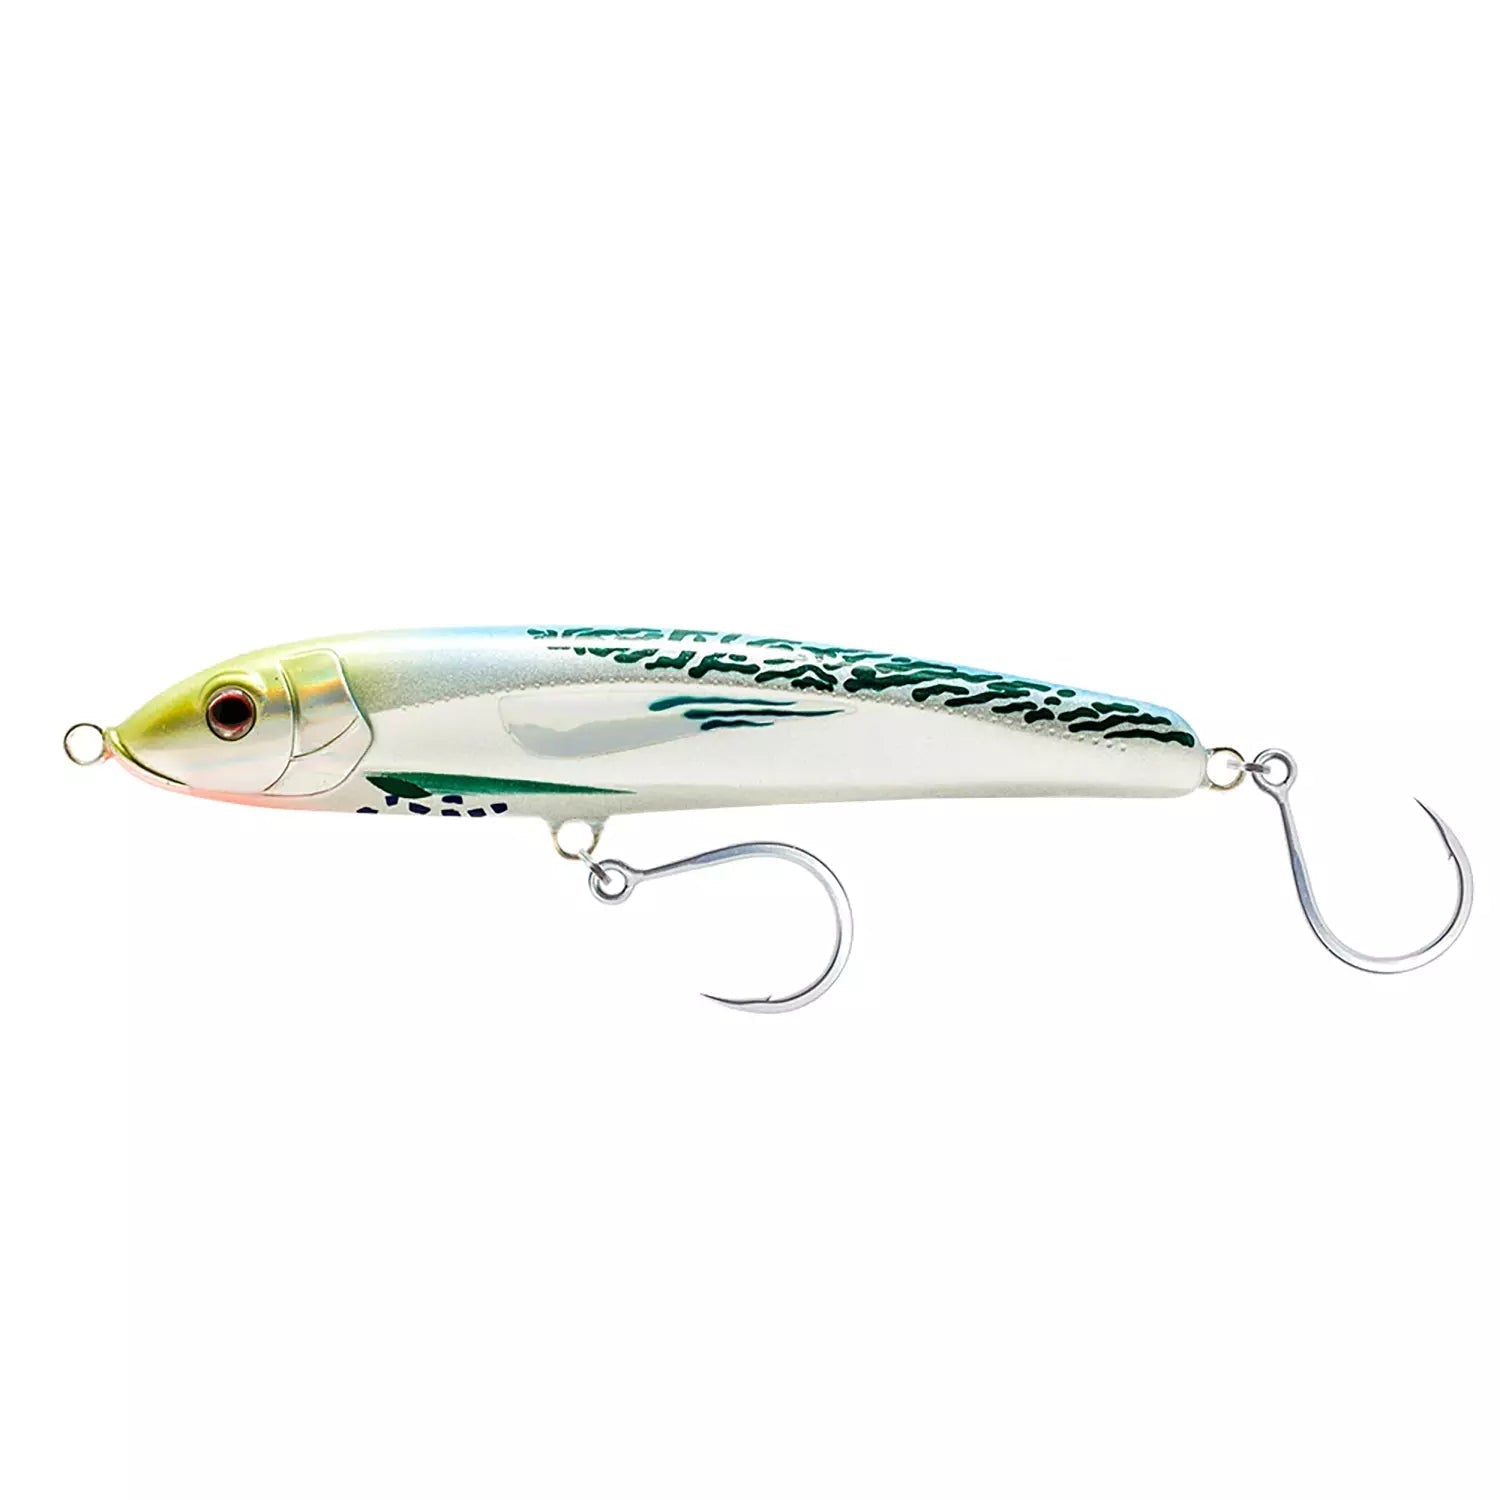 Nomad Design Riptide Slow Sink Lure-Lure - Poppers, Stickbaits & Pencils-Nomad-200mm-Mack Tuna-Fishing Station